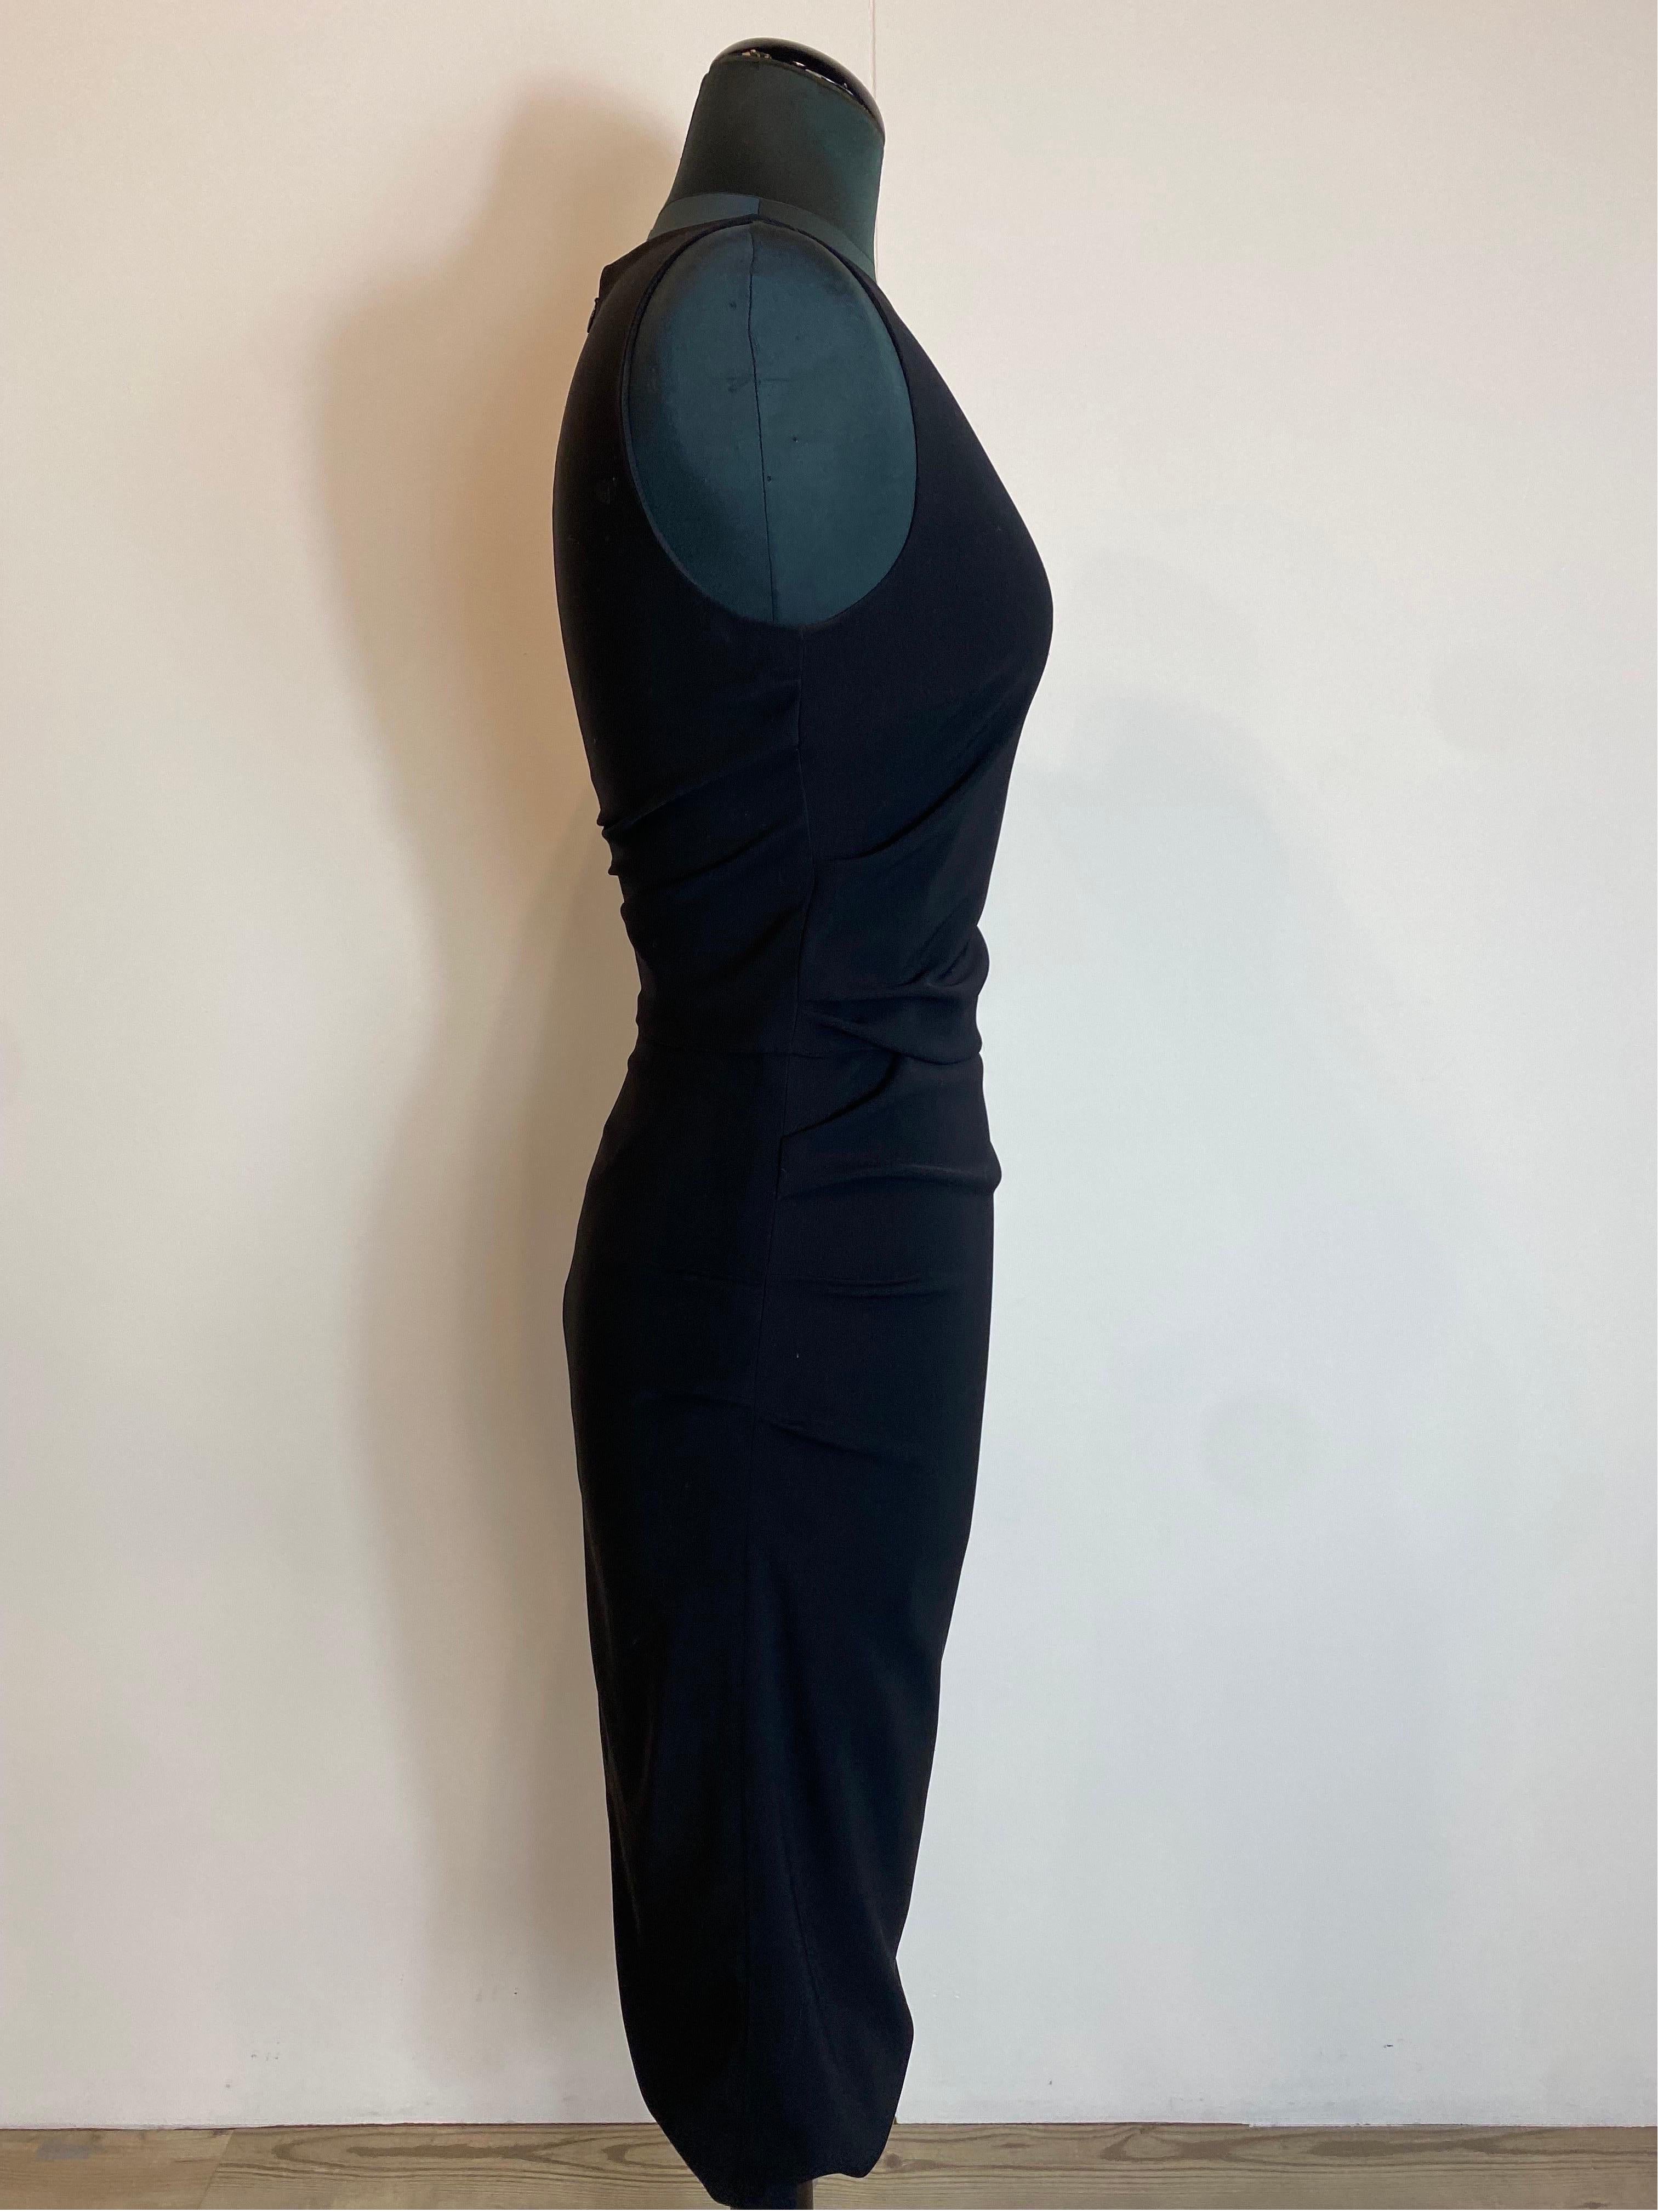 Sheath black dress Dolce & Gabbana  In Excellent Condition For Sale In Carnate, IT